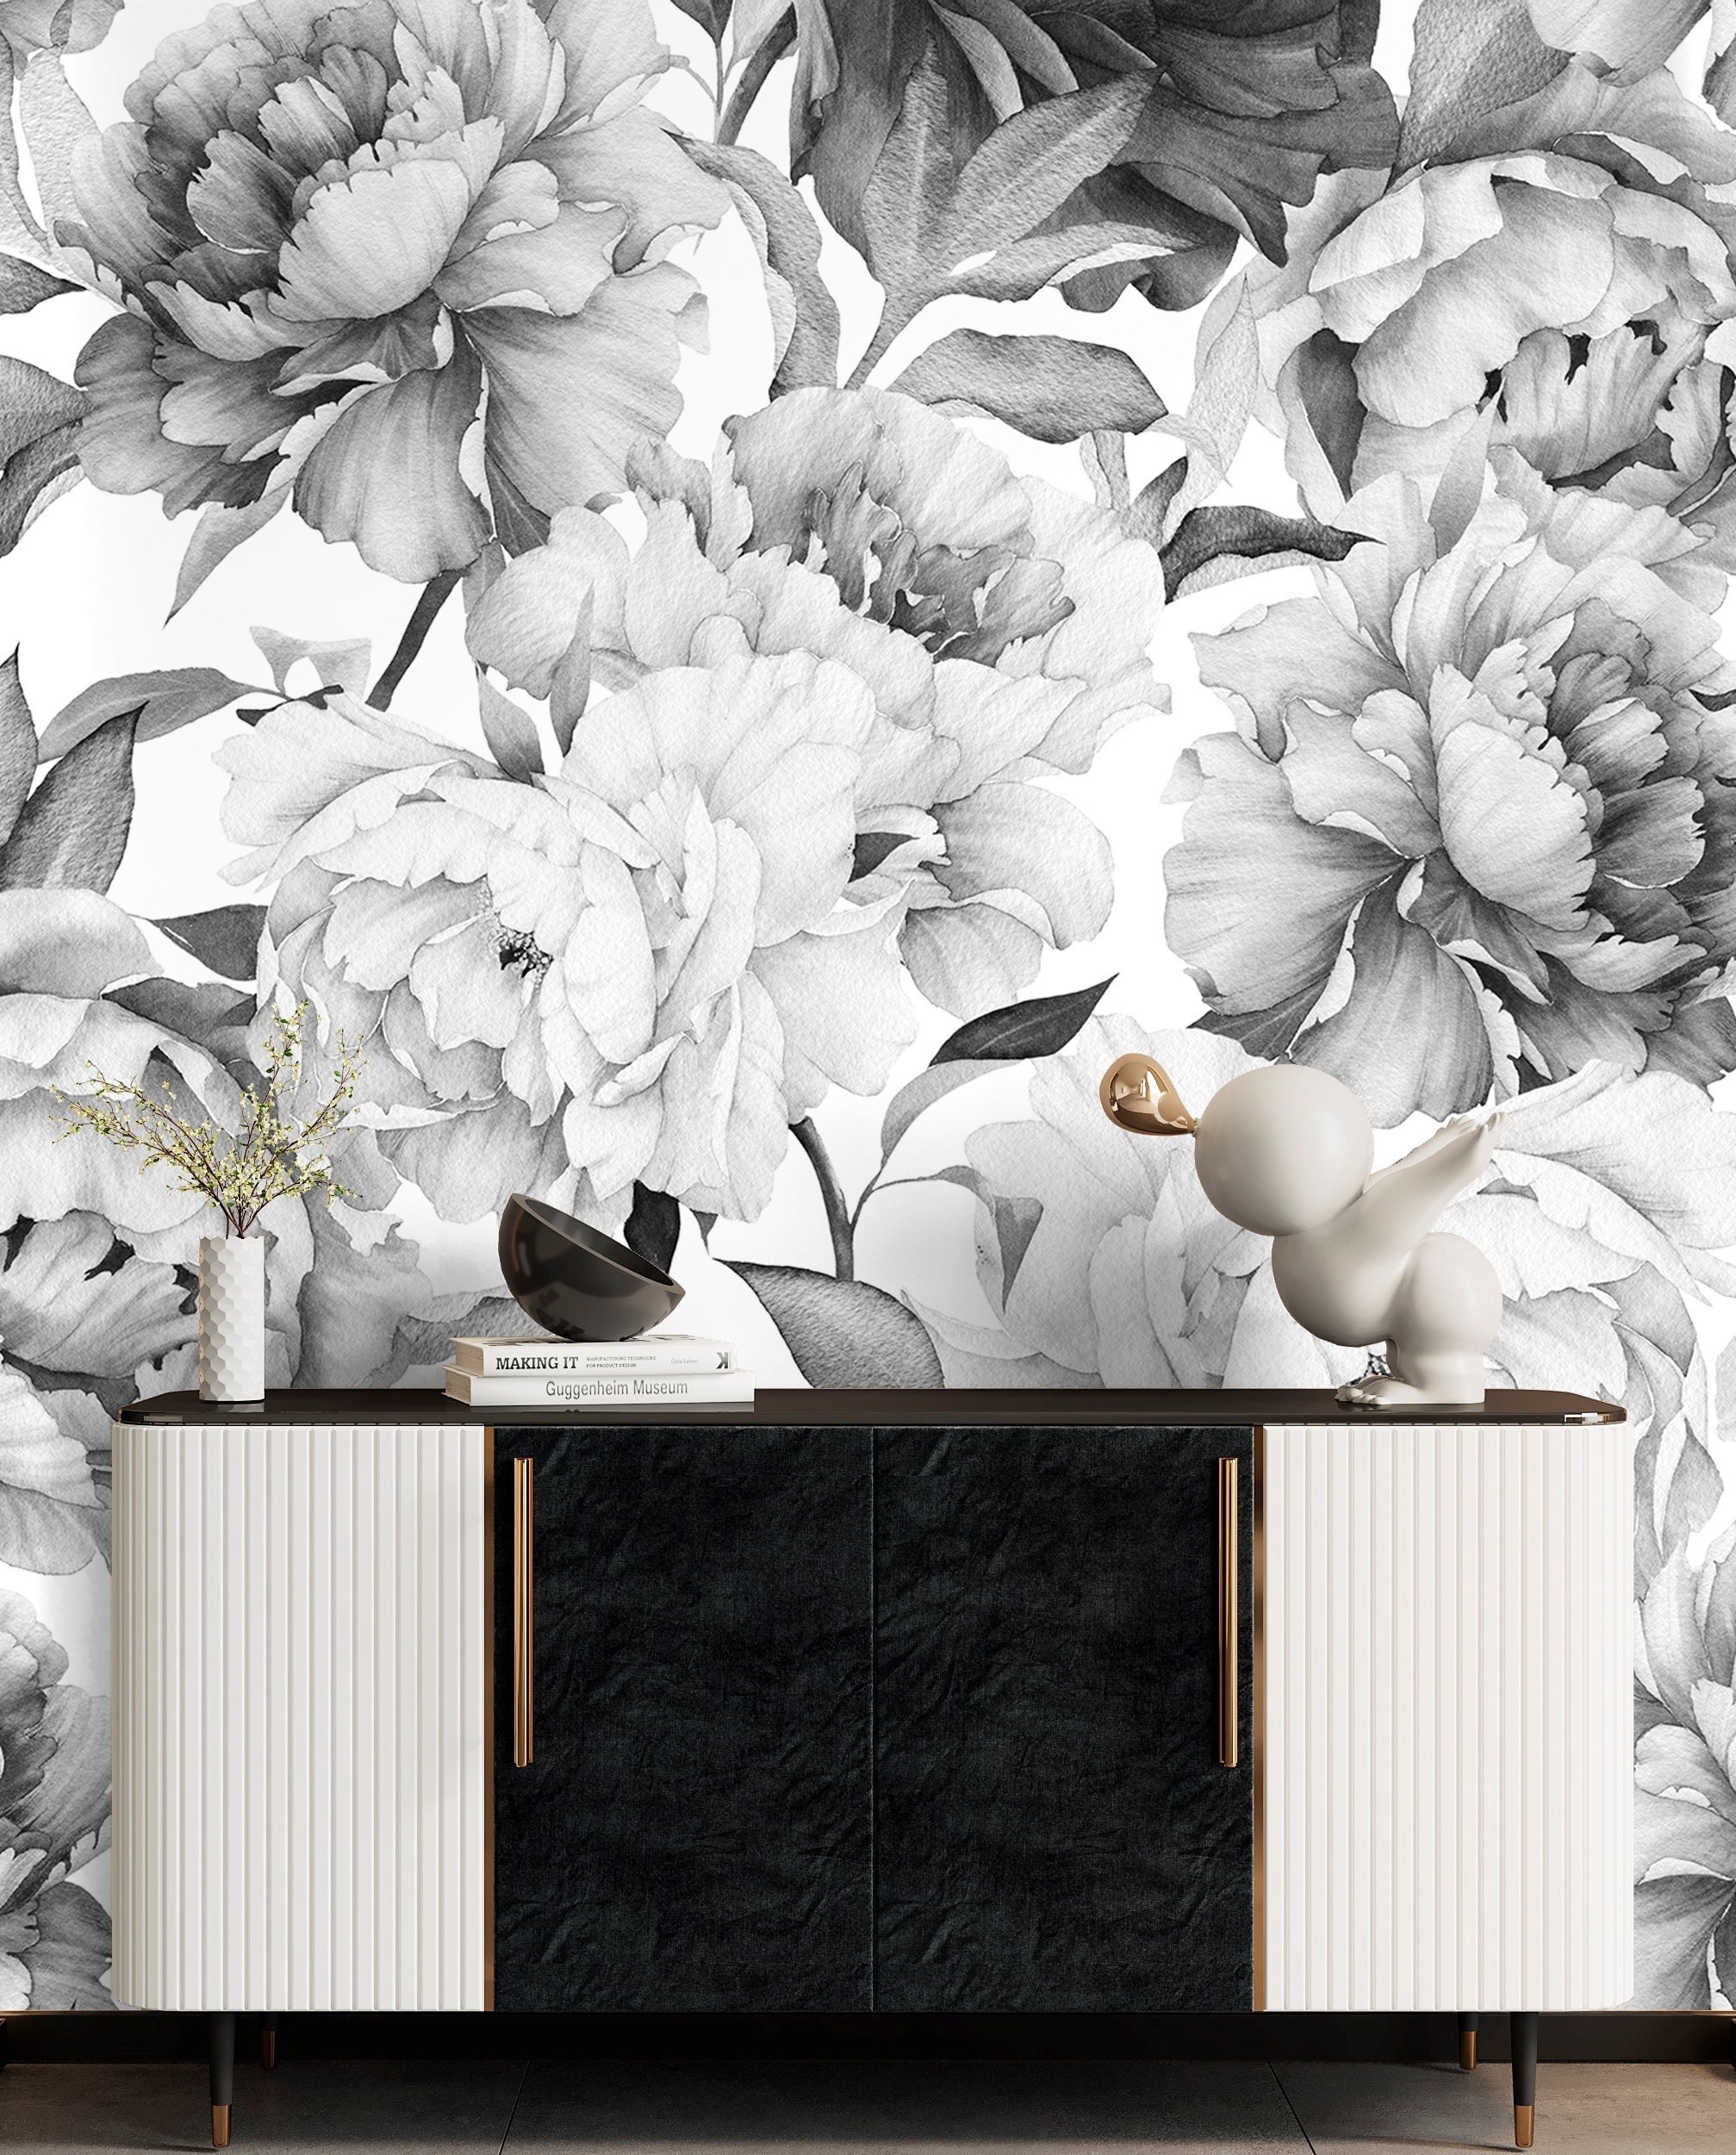 Black and White Peonies Wallpaper Peel and Stick and Prepasted  Bed Bath   Beyond  36791488